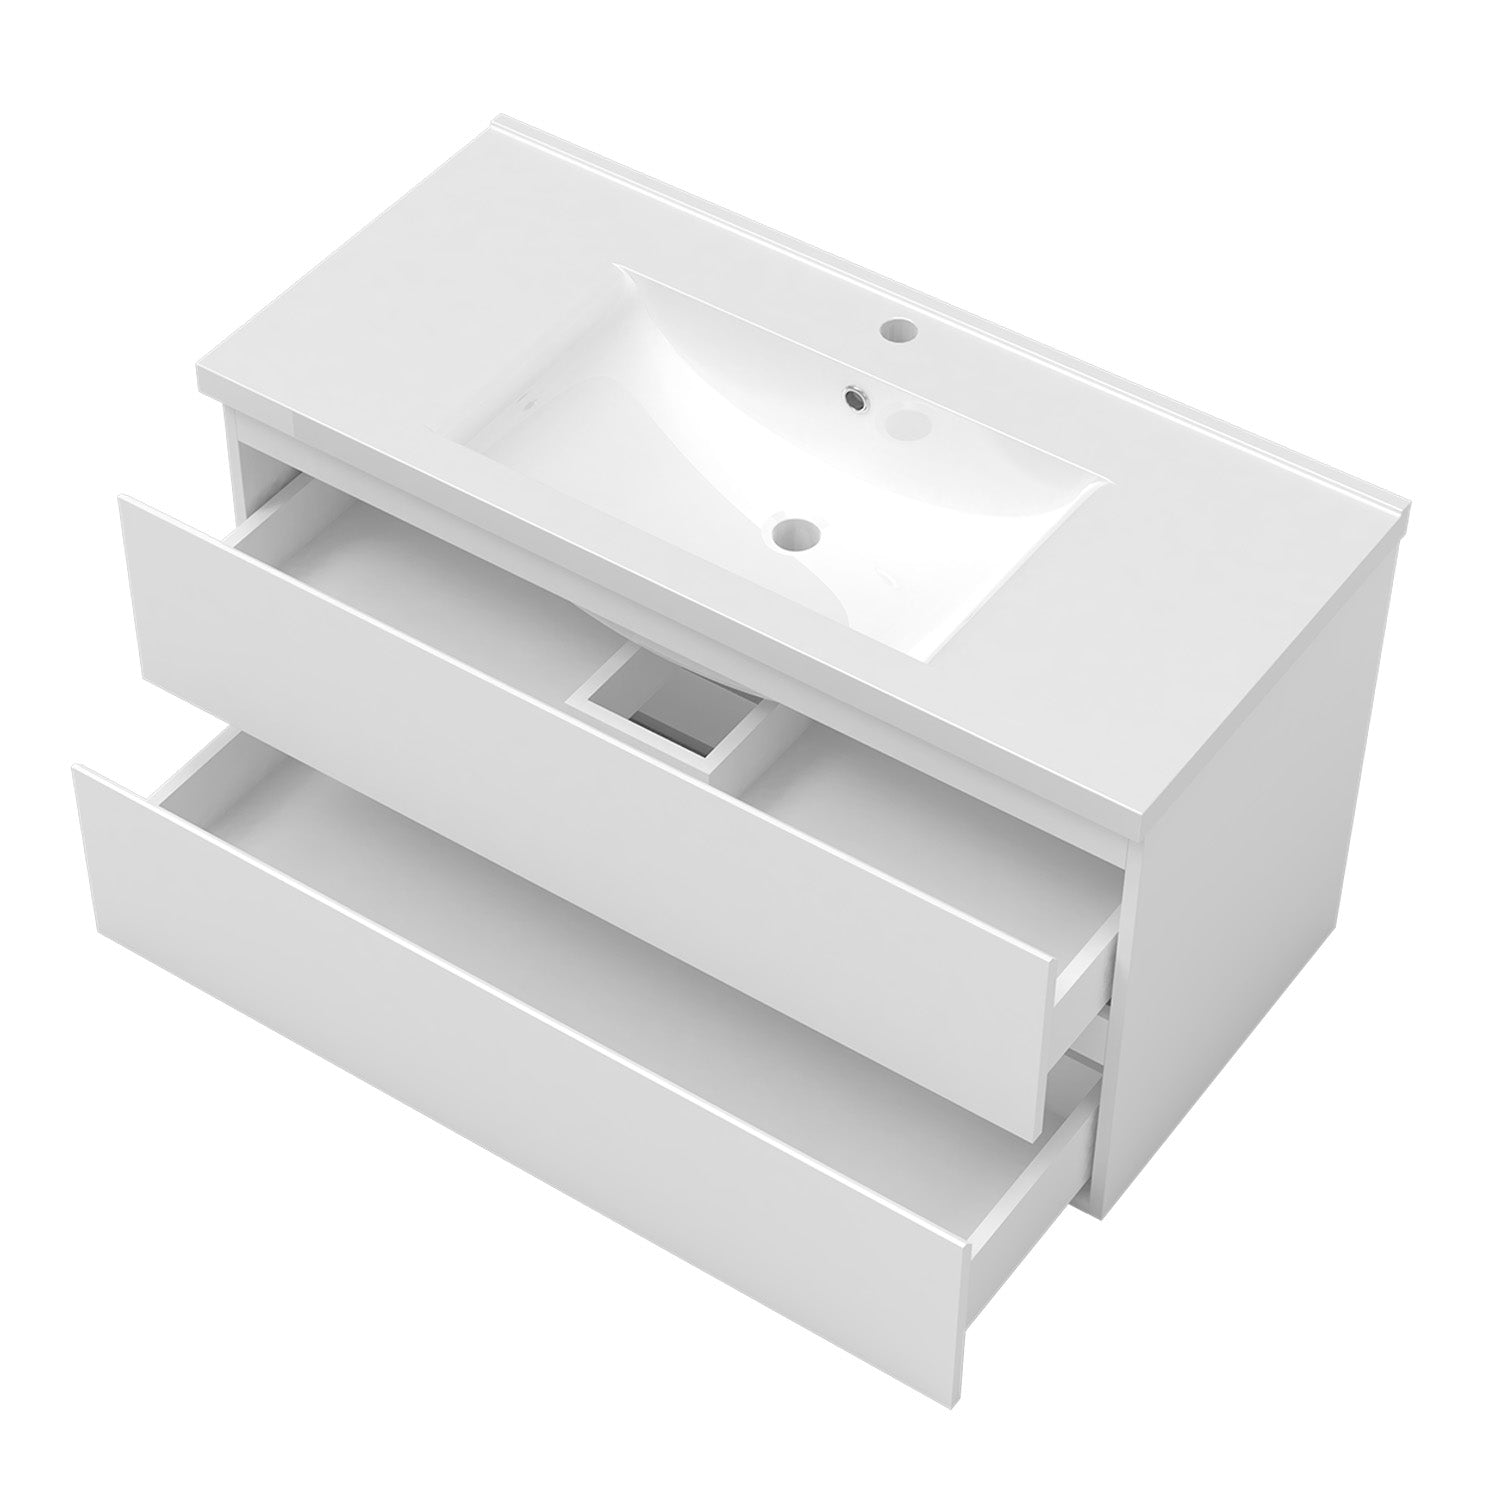 1000mm Wide Wall Mounted Vanity Units and Sink 2 Drawers - Matt White